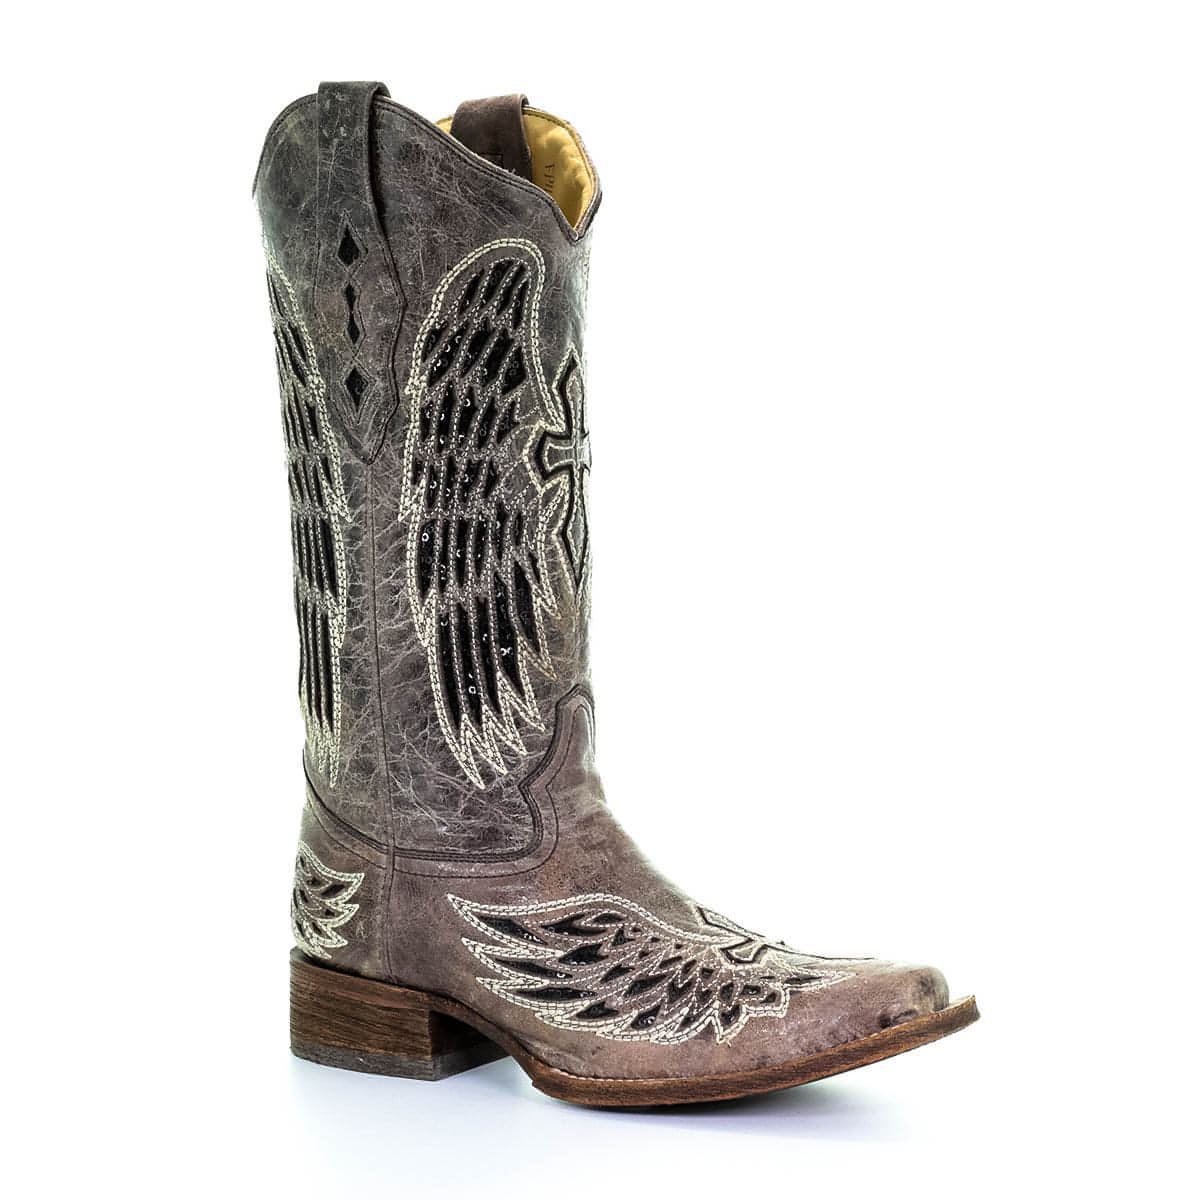 Corral Women's Brown w/ Black Wing & Cross Sequence Square Toe Boots